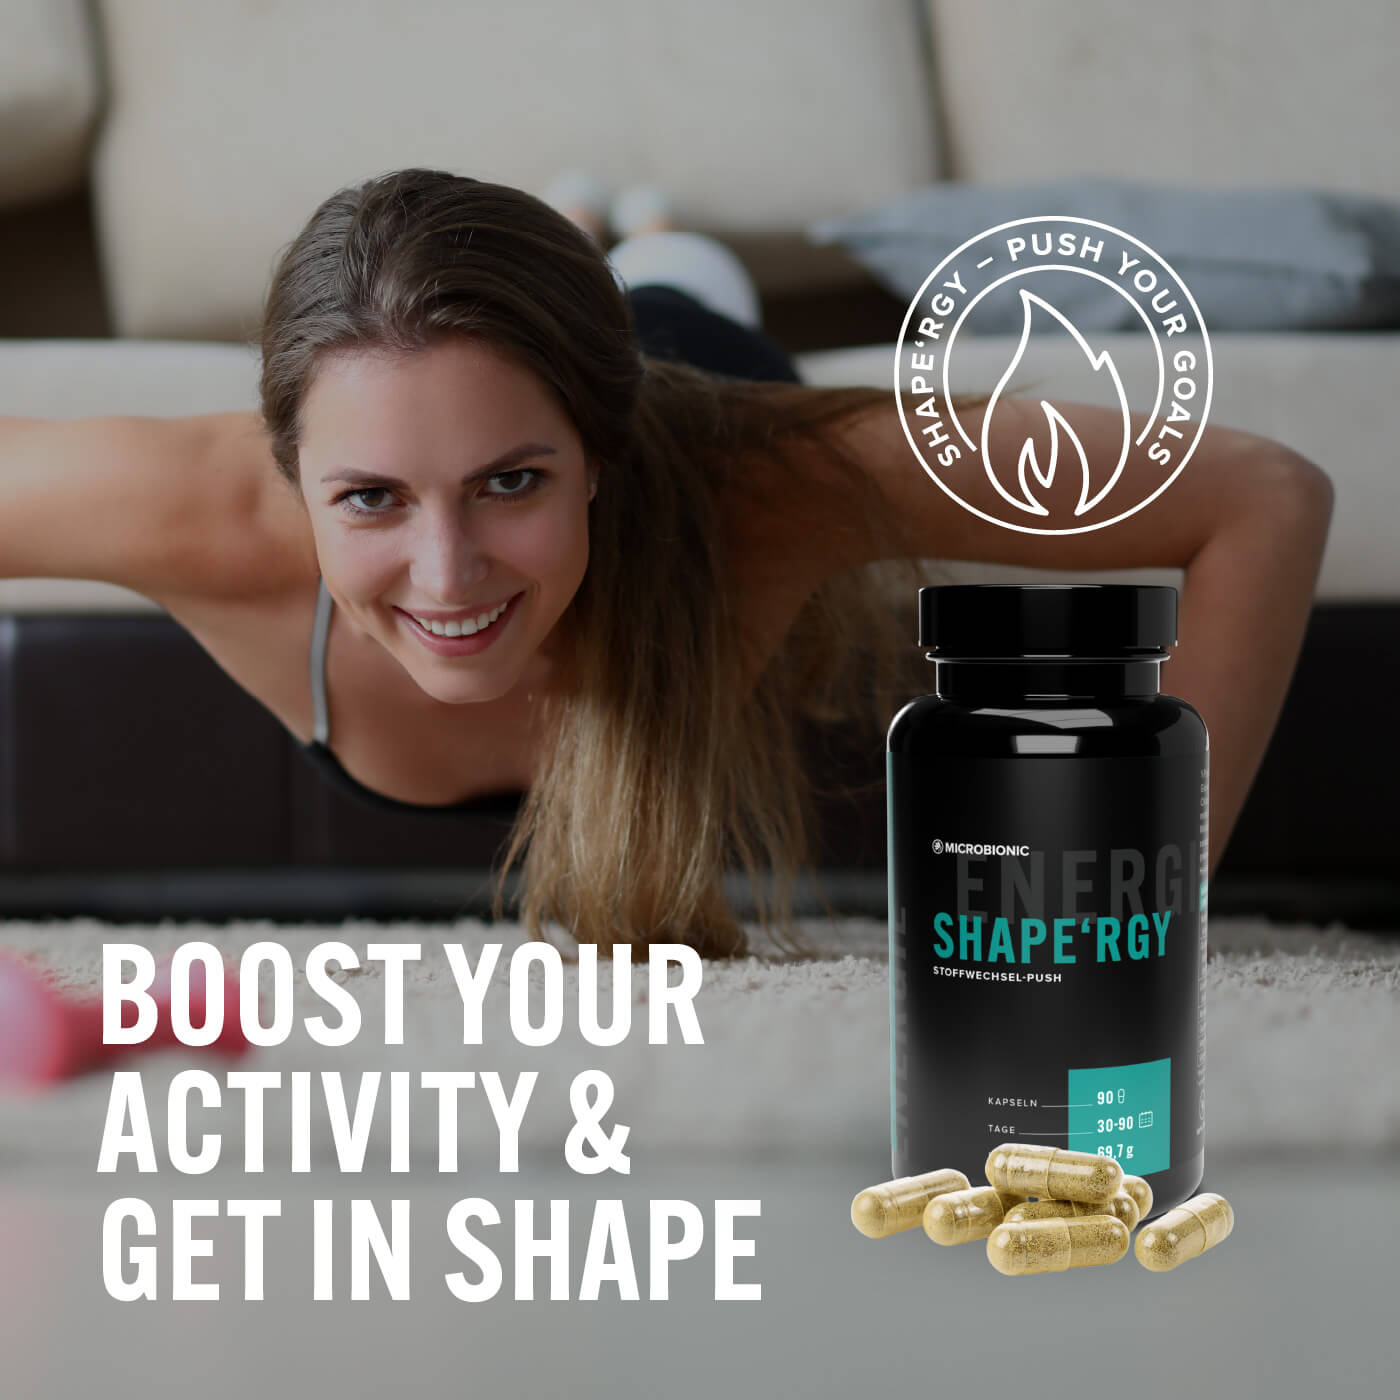 Shape'rgy – Boost Your Activity And Get In Shape